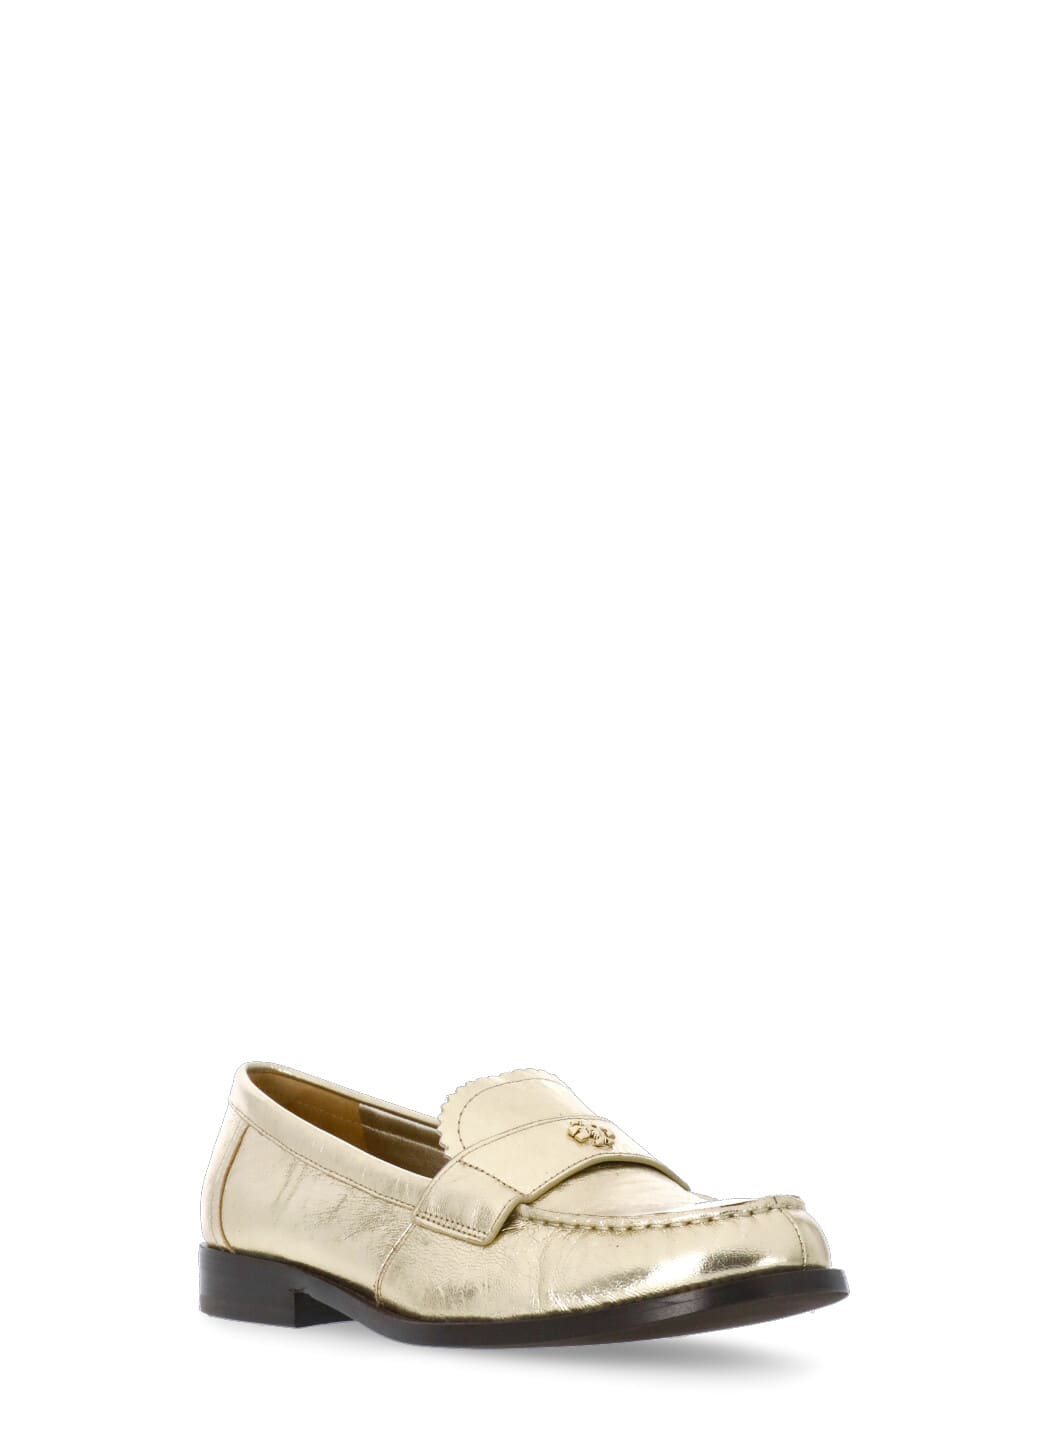 Shop Tory Burch Leather Loafer In Golden